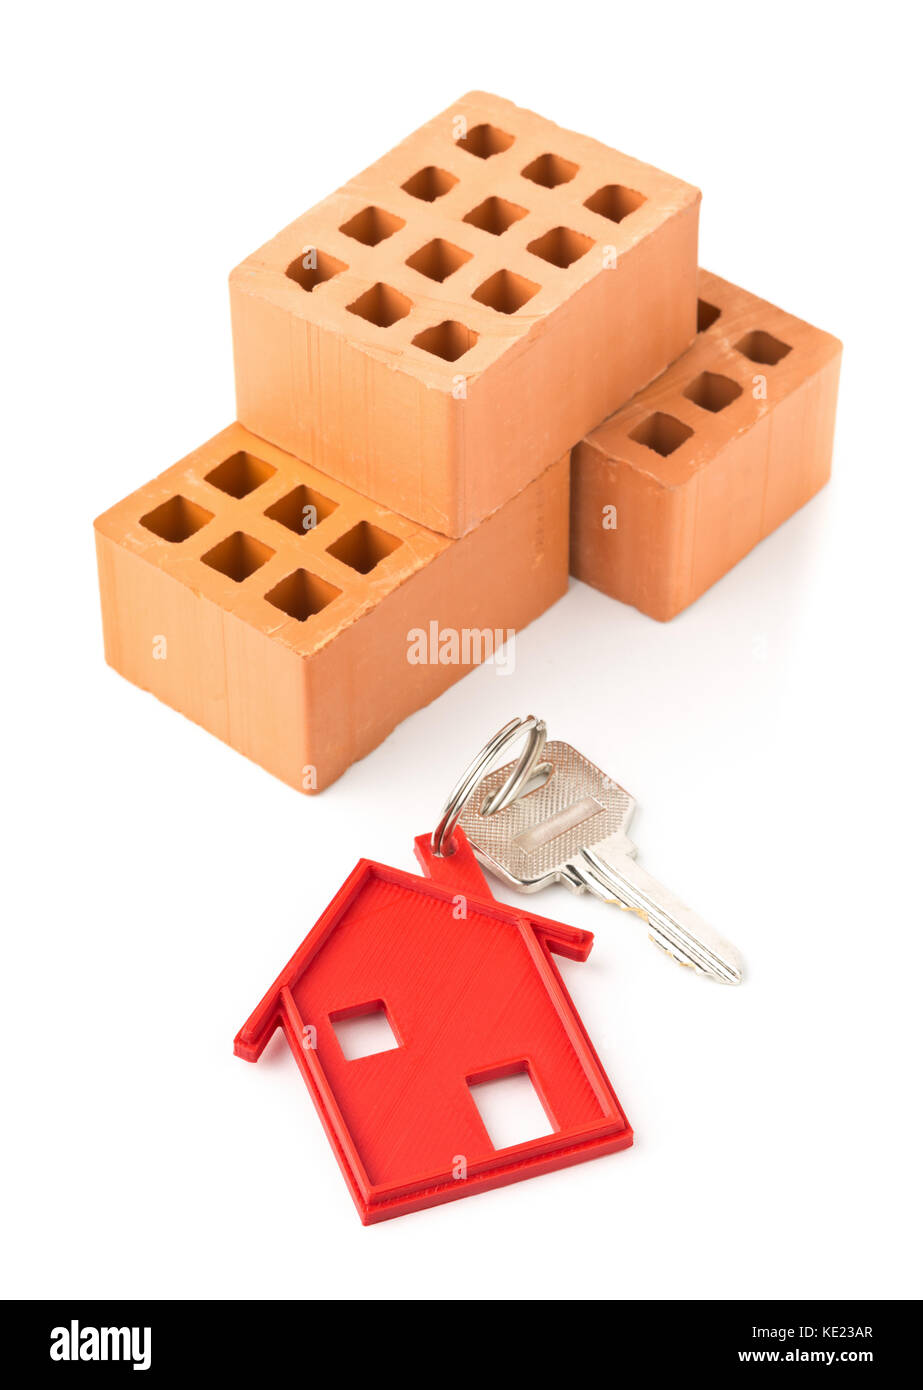 House door key with red house key chain pendant and bricks over white background Stock Photo